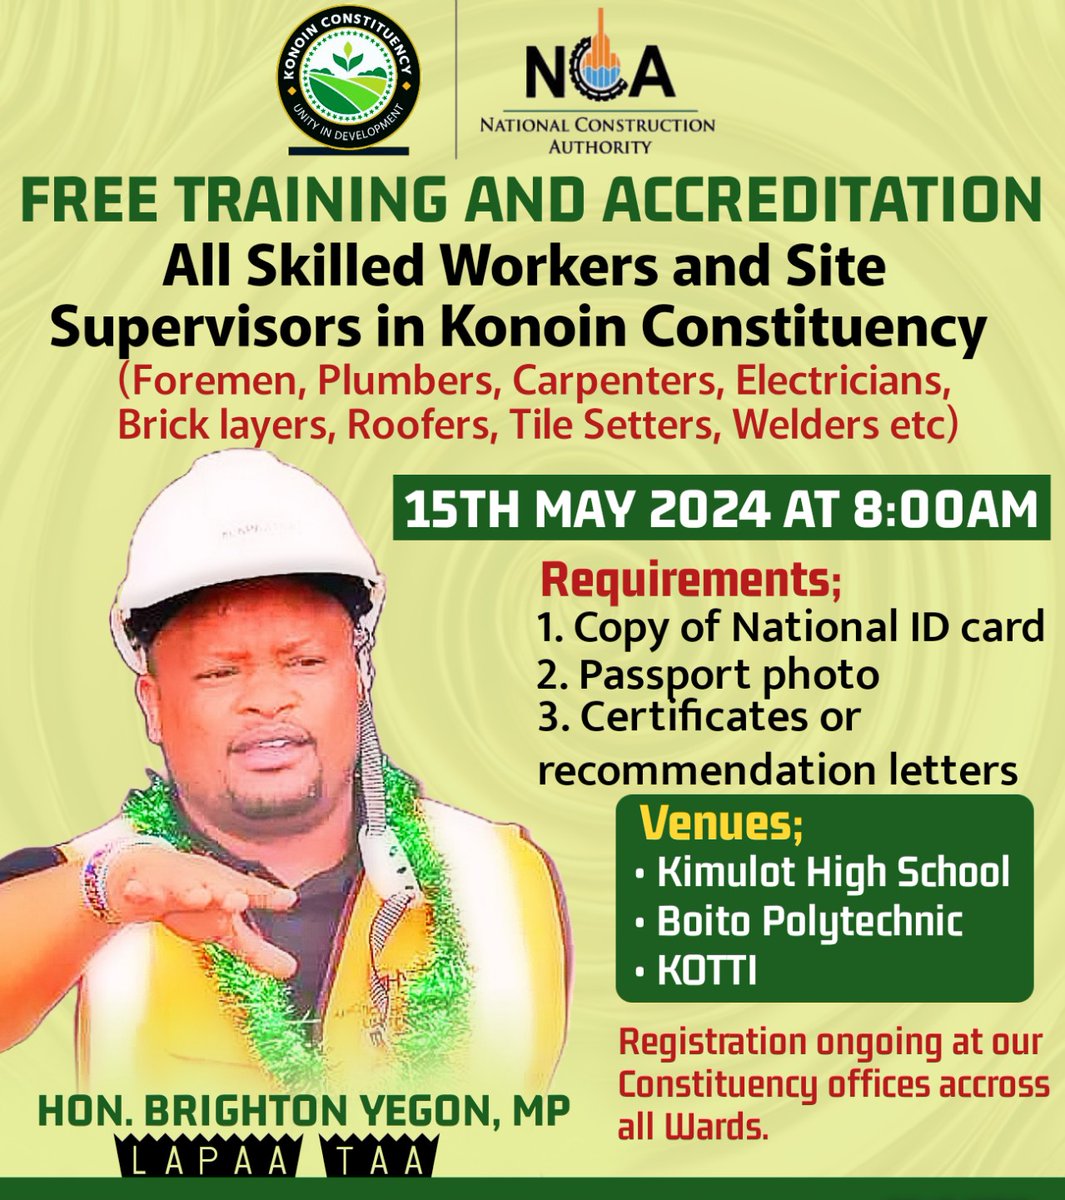 FREE TRAINING AND ACCREDITATION BY NATIONAL CONSTRUCTION AUTHORITY(NCA).
Date: 15/05/2024 - 17/05/2024
Time: 800AM
WHO TO ATTEND: All skilled workers and site supervisors.
Registration ongoing at our Constituency offices accross all Wards. 
#TuwasilianeKwaMaendeleo
Lapaa Taa